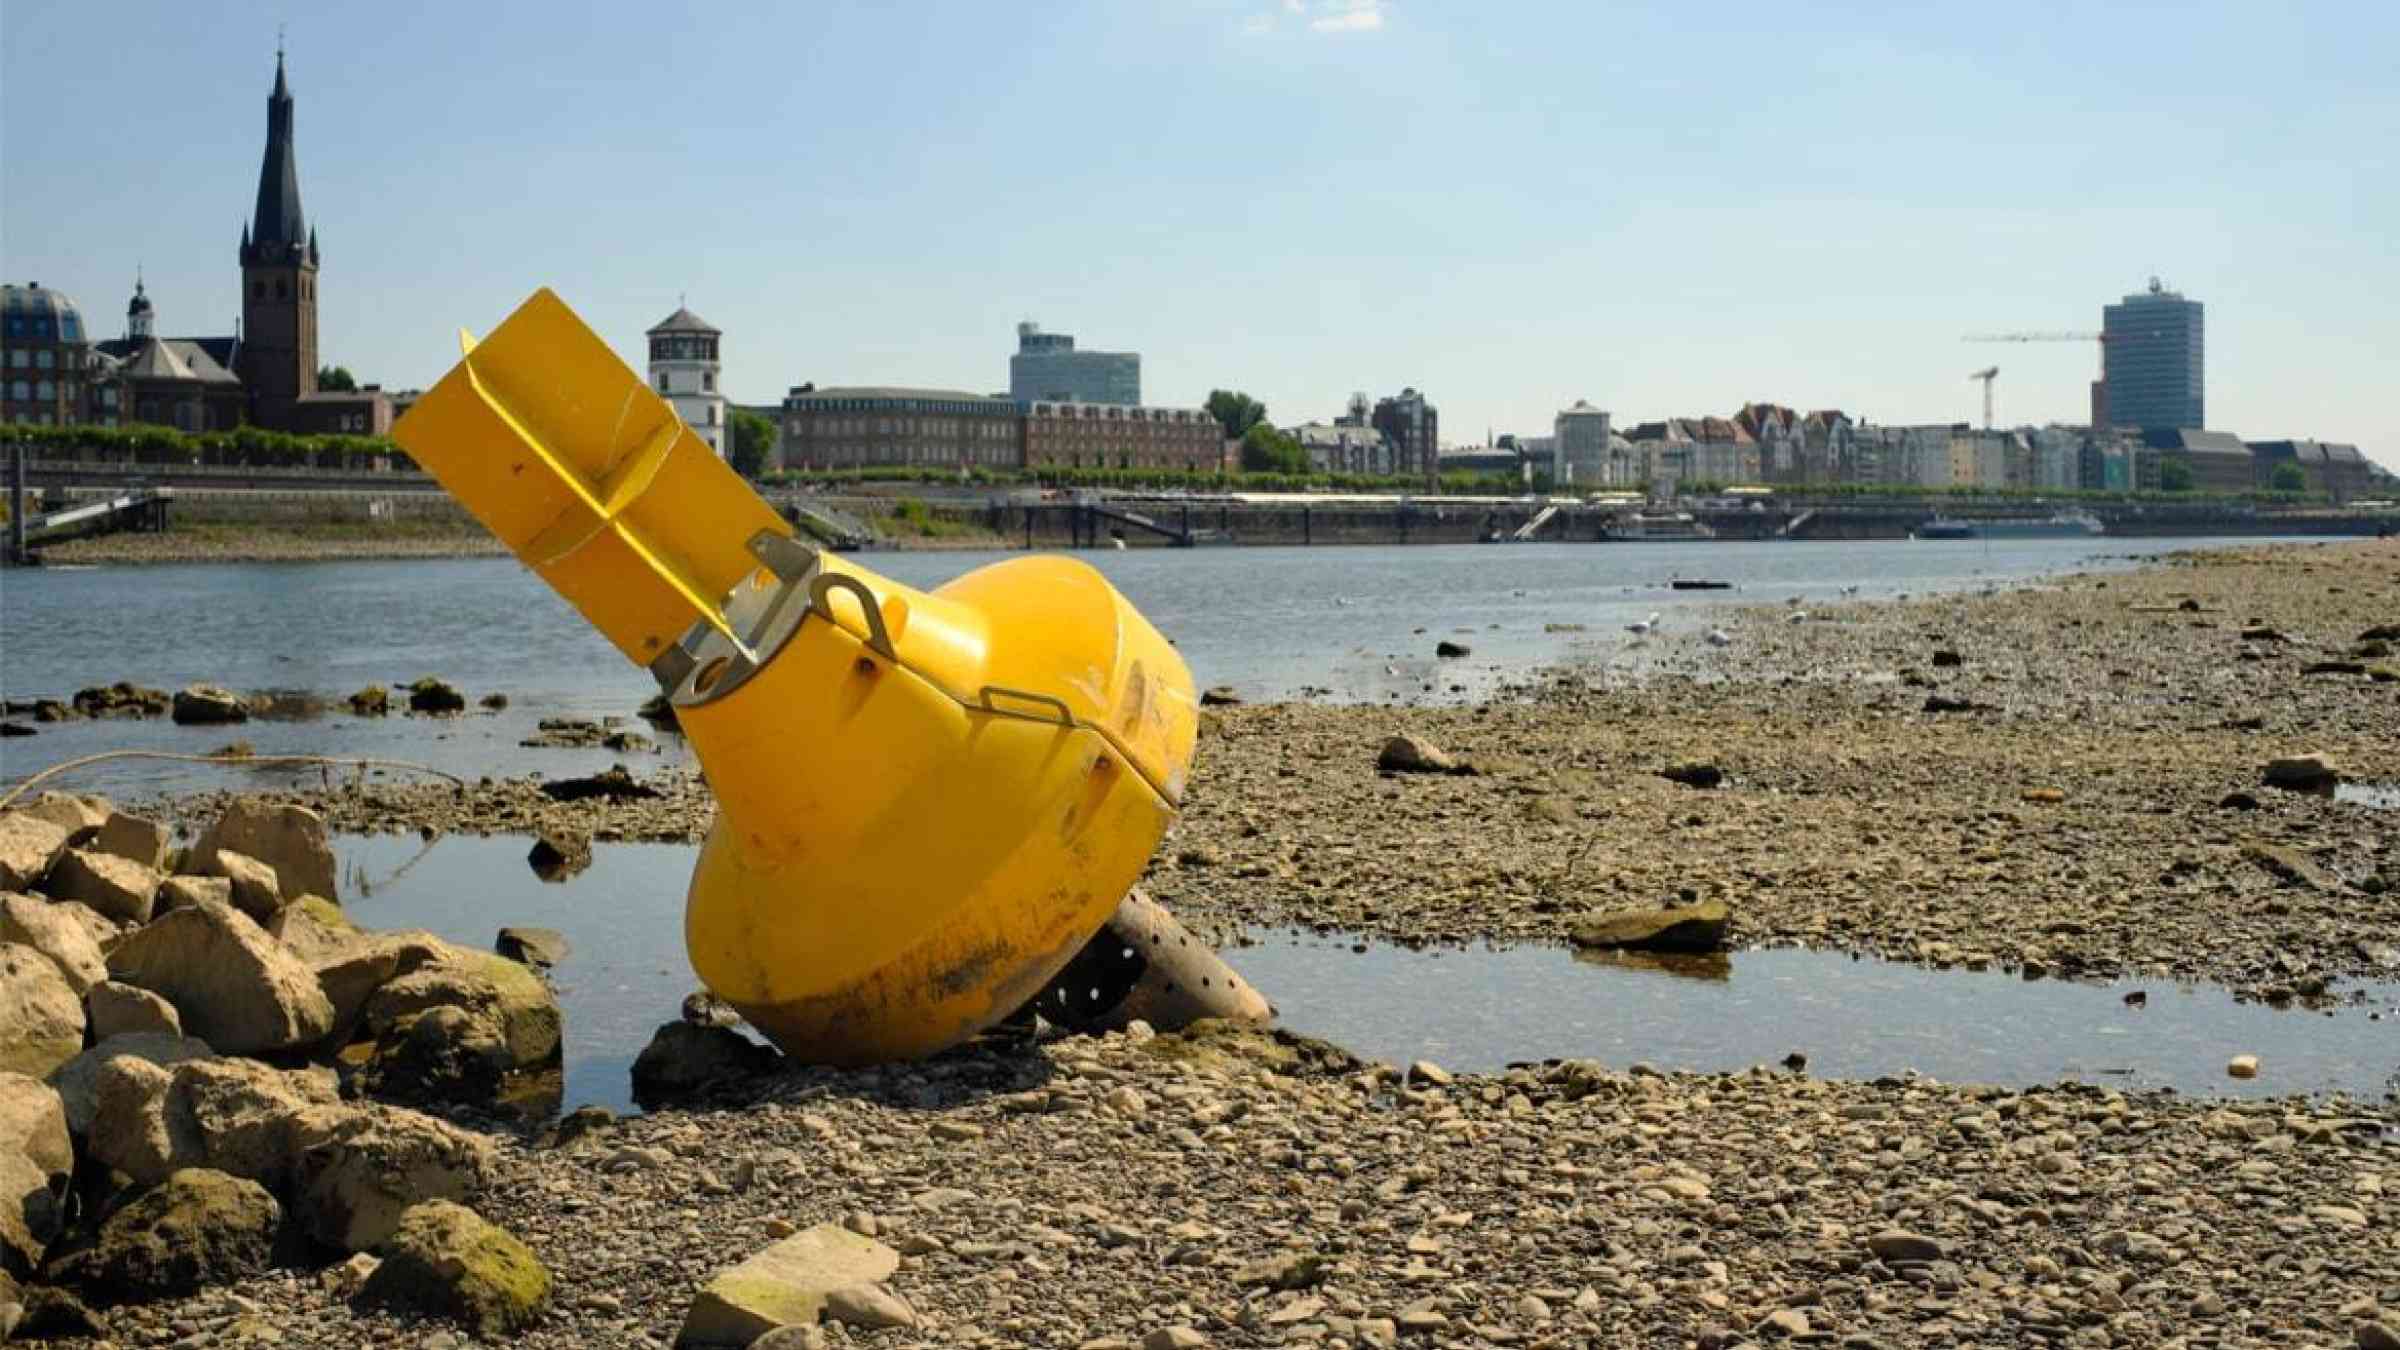 An image of a yellow buoy resting on the dried Rhine riverbed